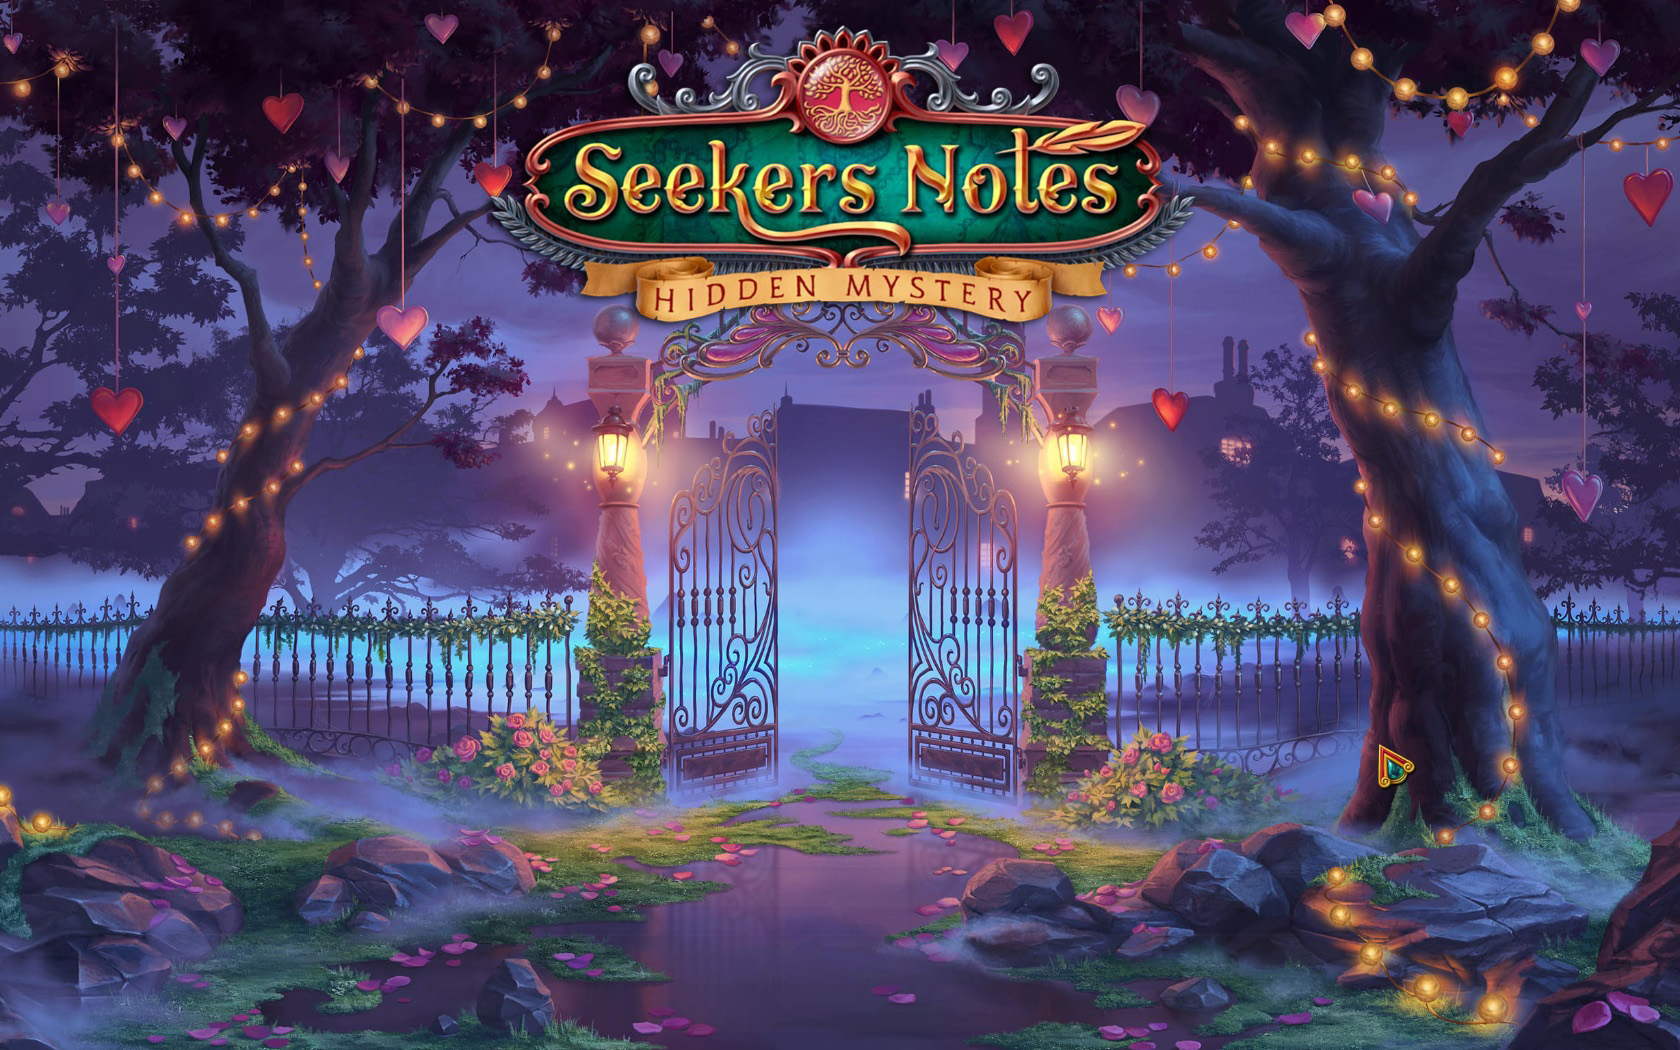 cheat codes for seekers notes hidden mystery